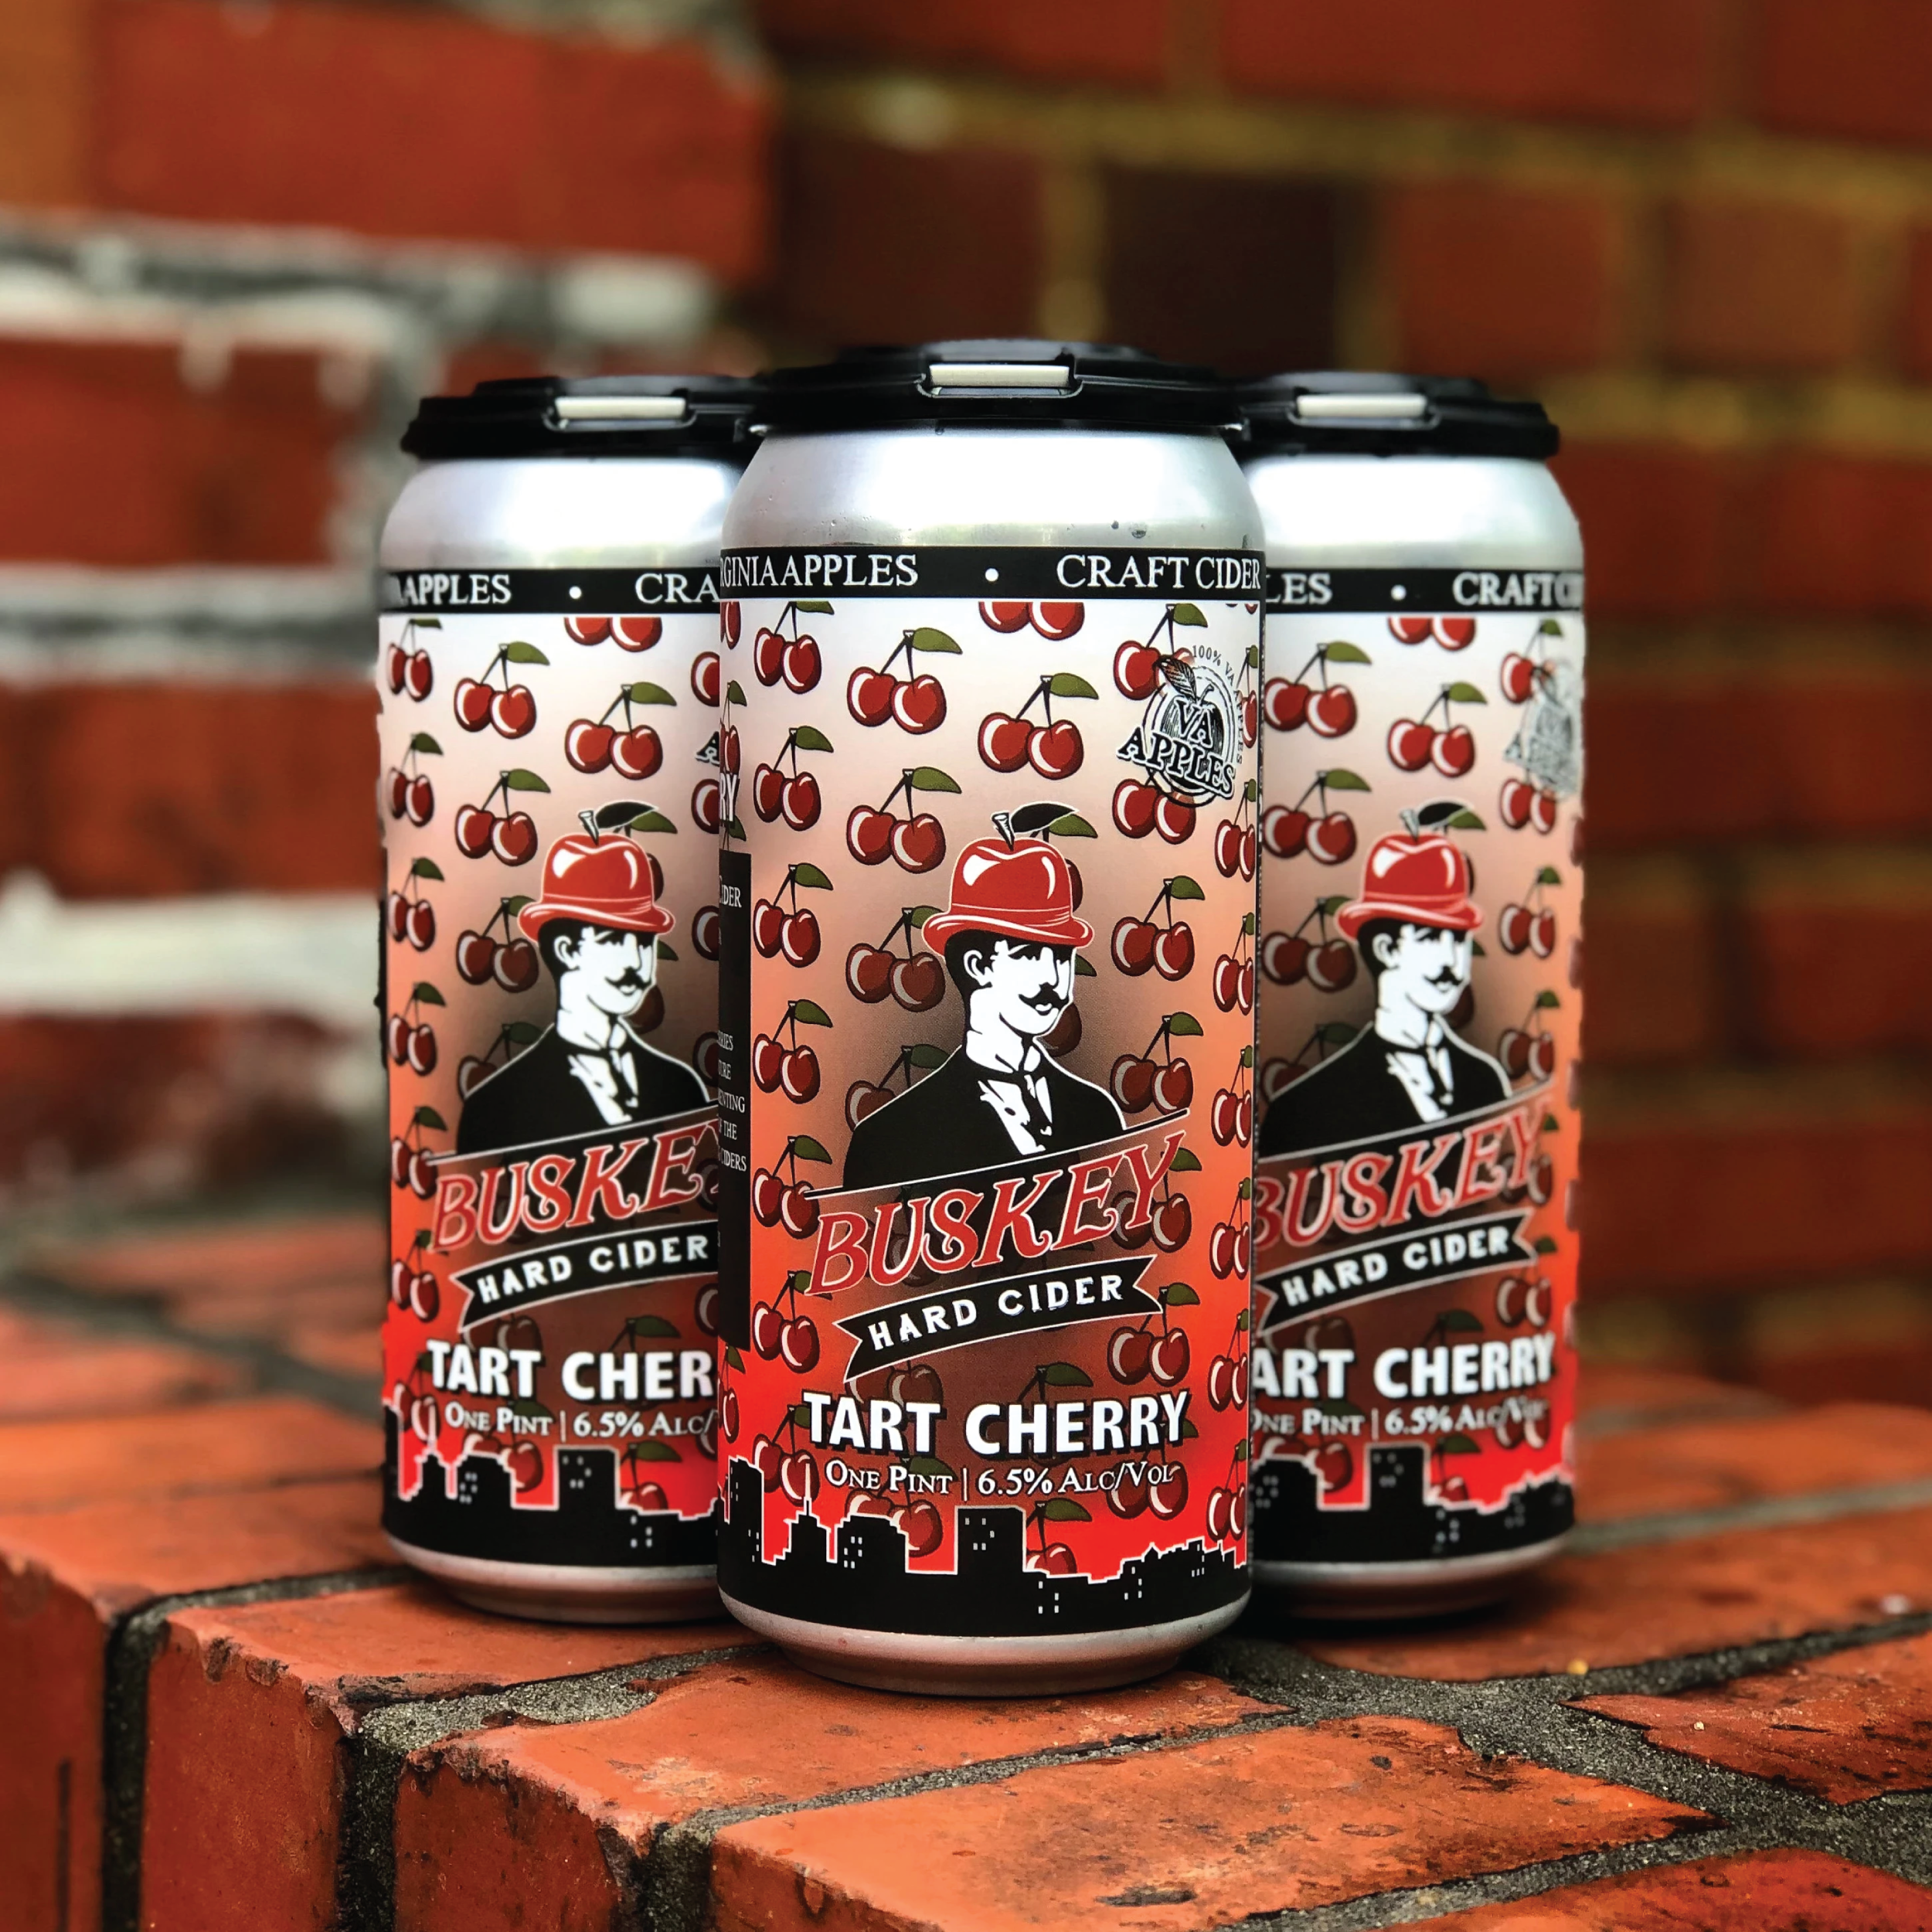 16oz 4-pack of Buskey Tart Cherry Cider cans